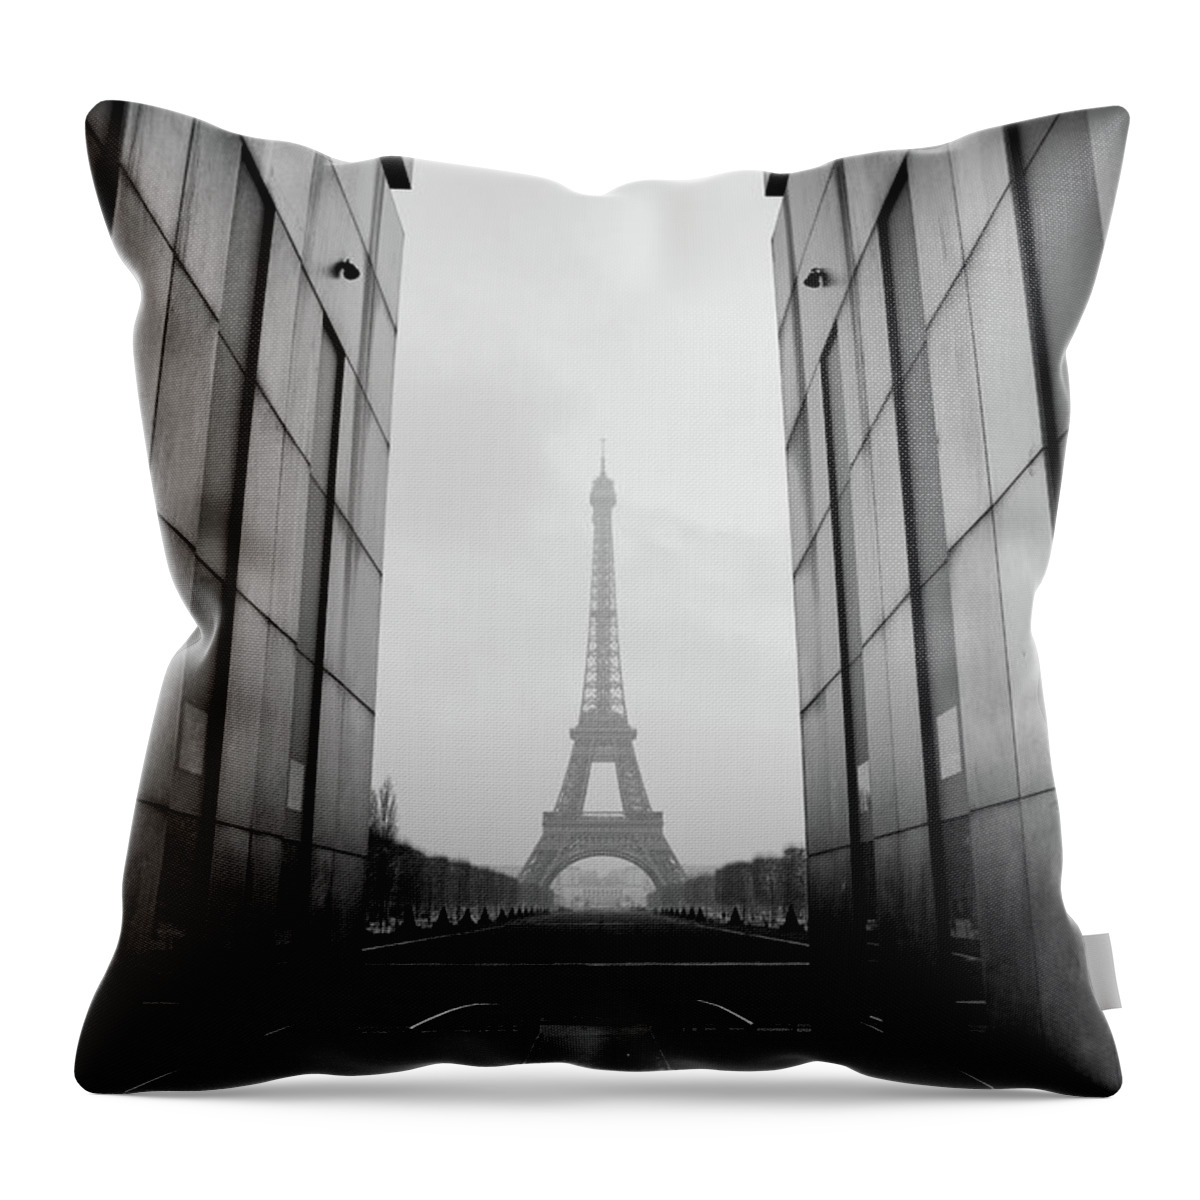 Arch Throw Pillow featuring the photograph Eiffel Tower And Wall For Peace by Cyril Couture @